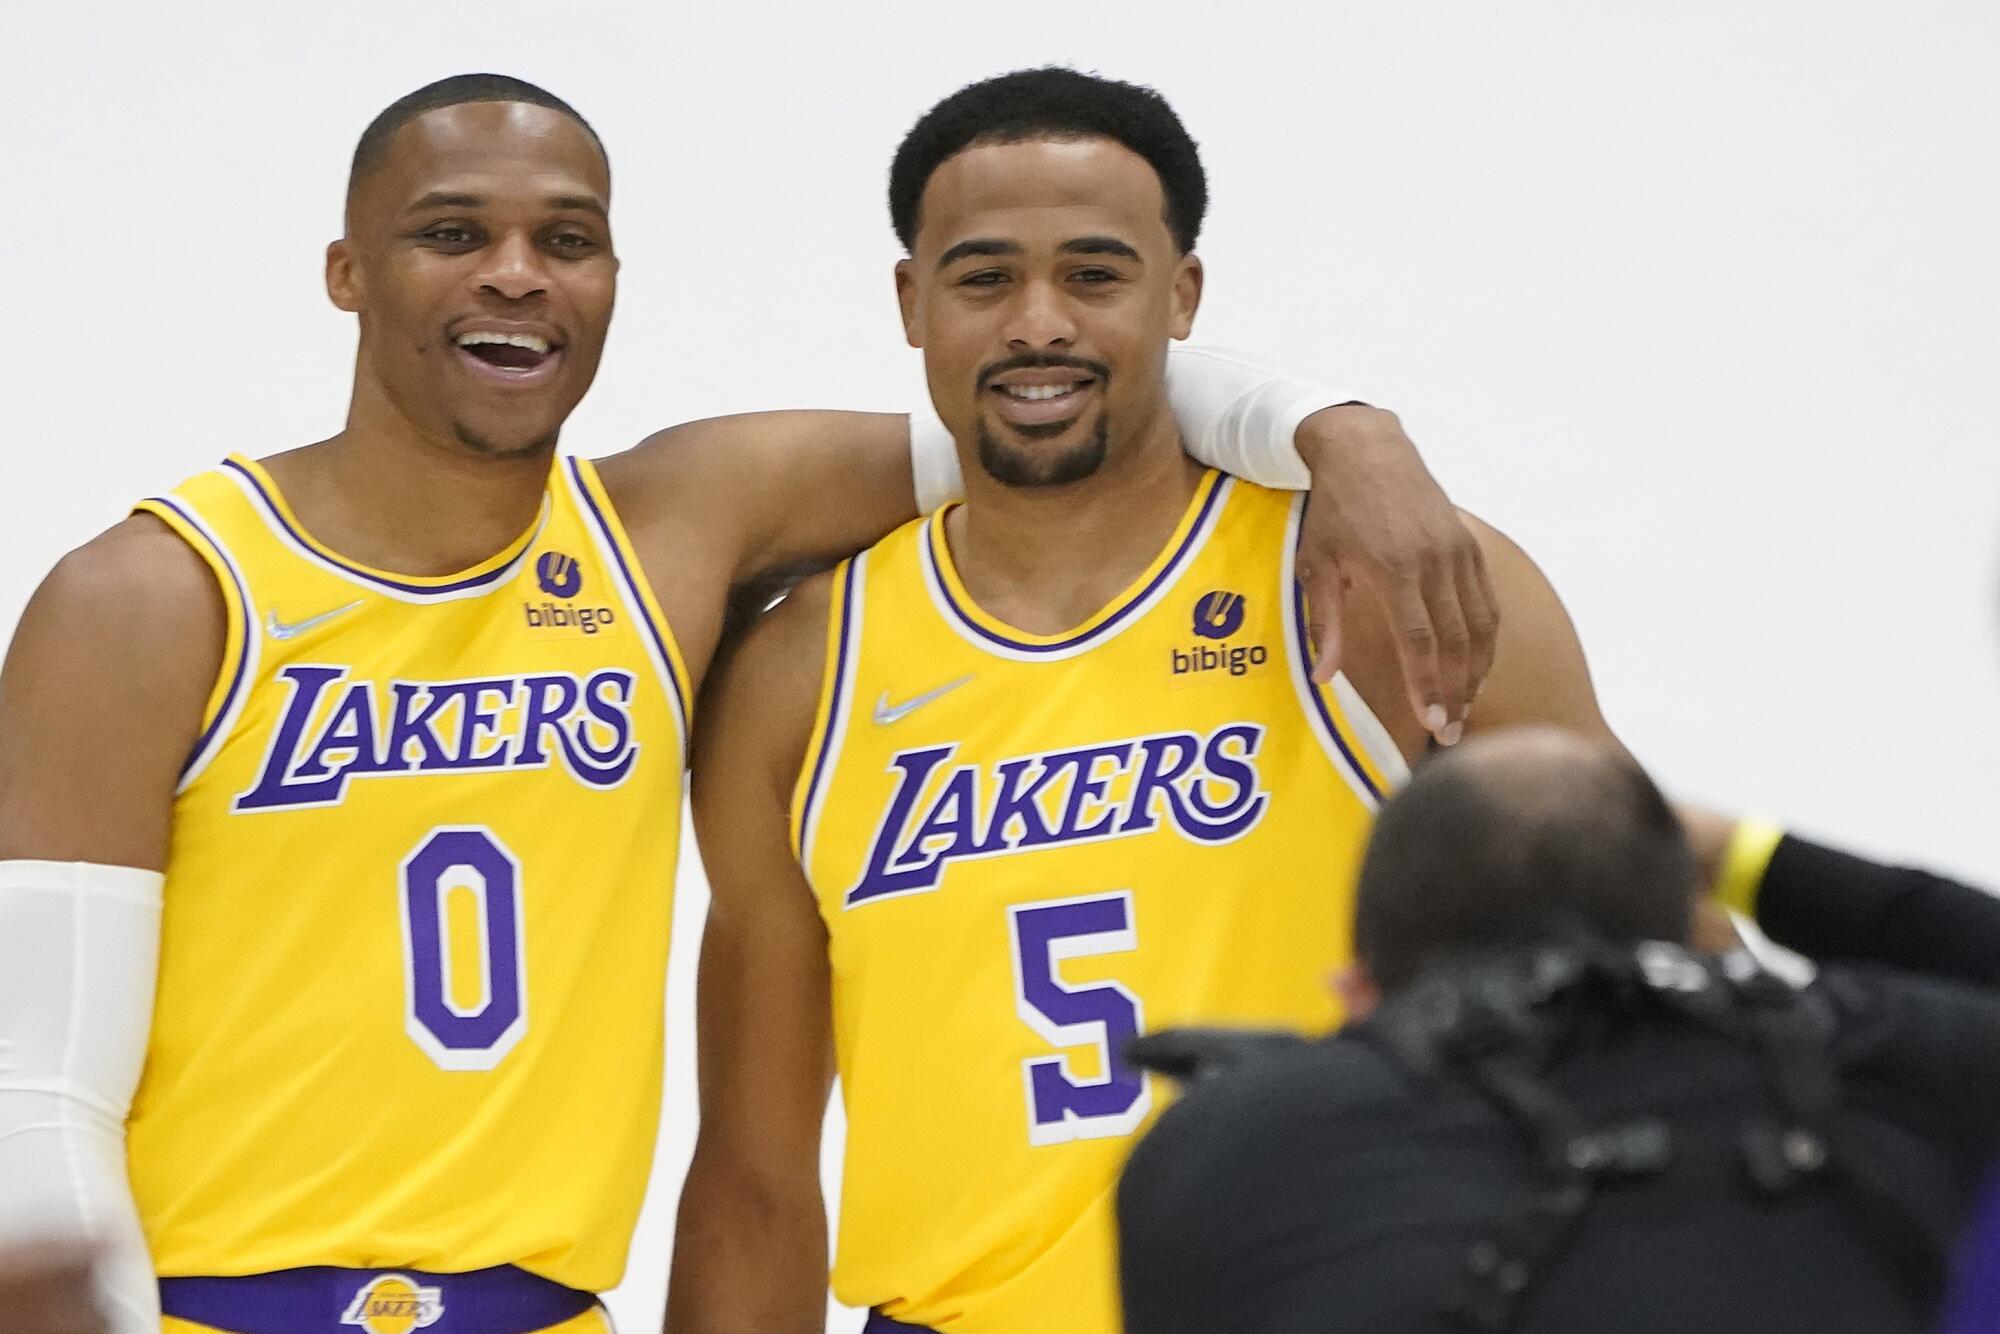 Los Angeles Lakers guard Russell Westbrook, left, takes a photo with Talen Horton-Tucker (5).